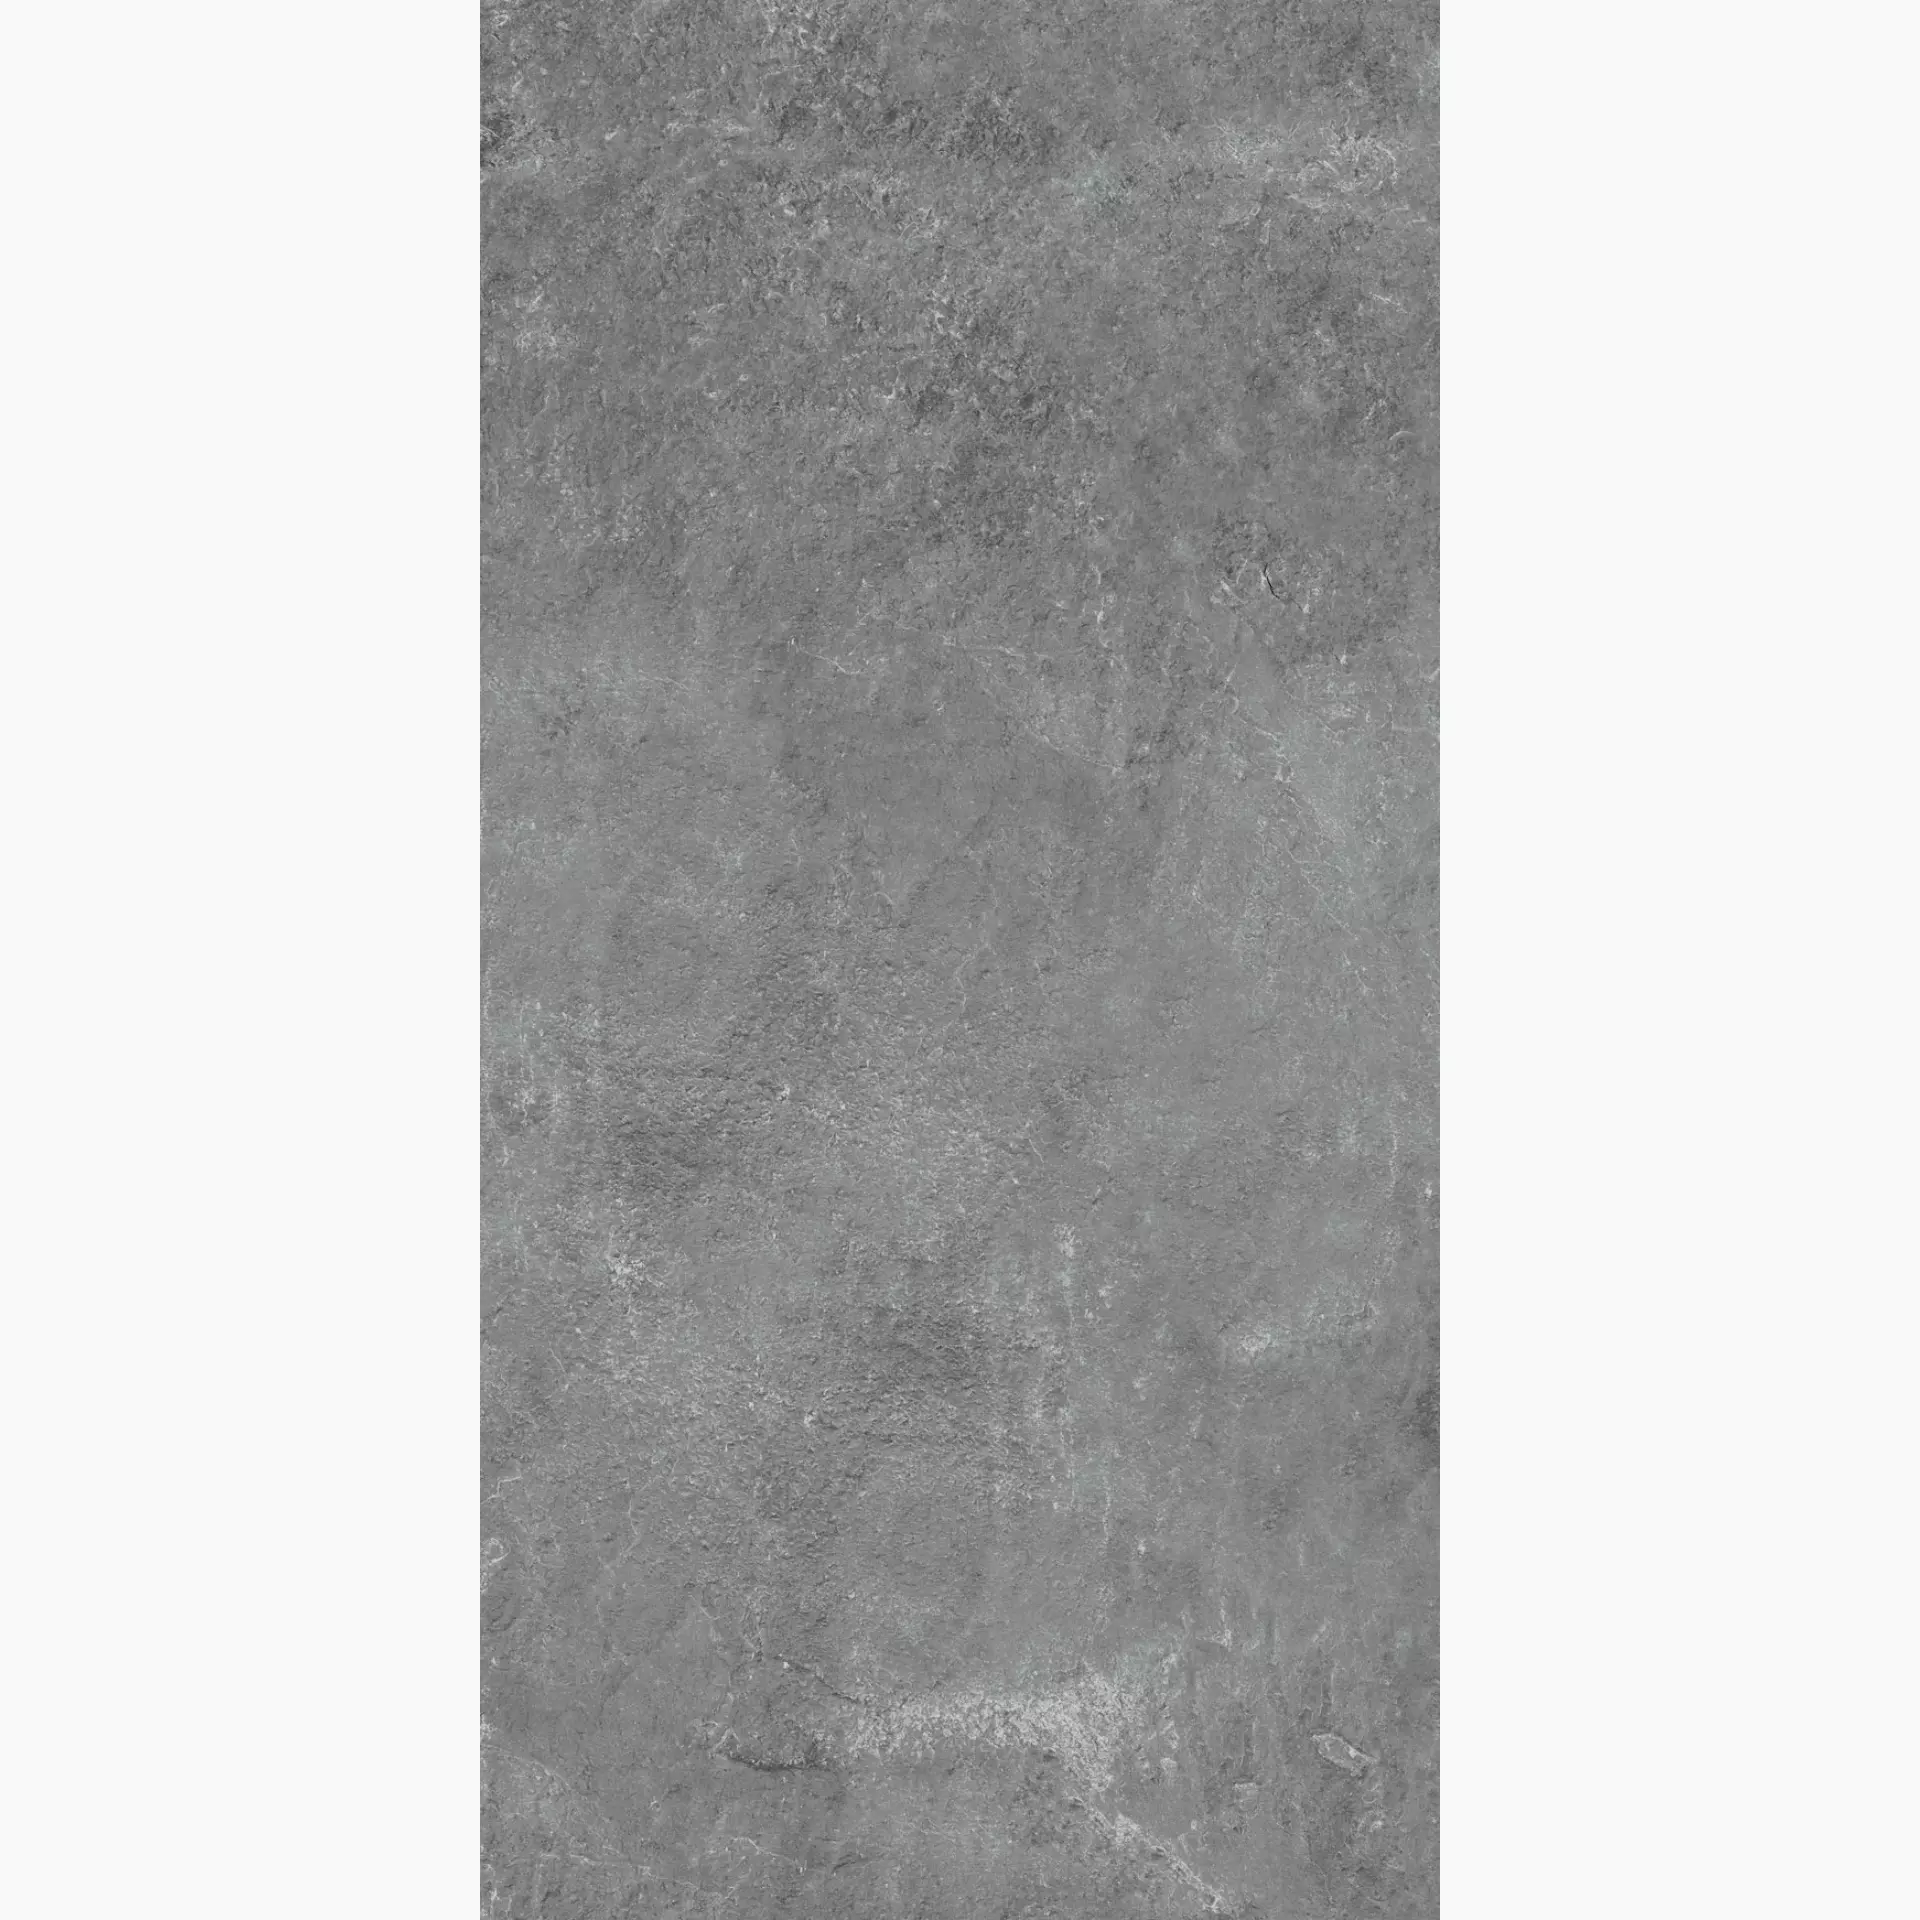 Keope Extreme Anthracite Strutturato 424E5933 45x90cm rectified 20mm